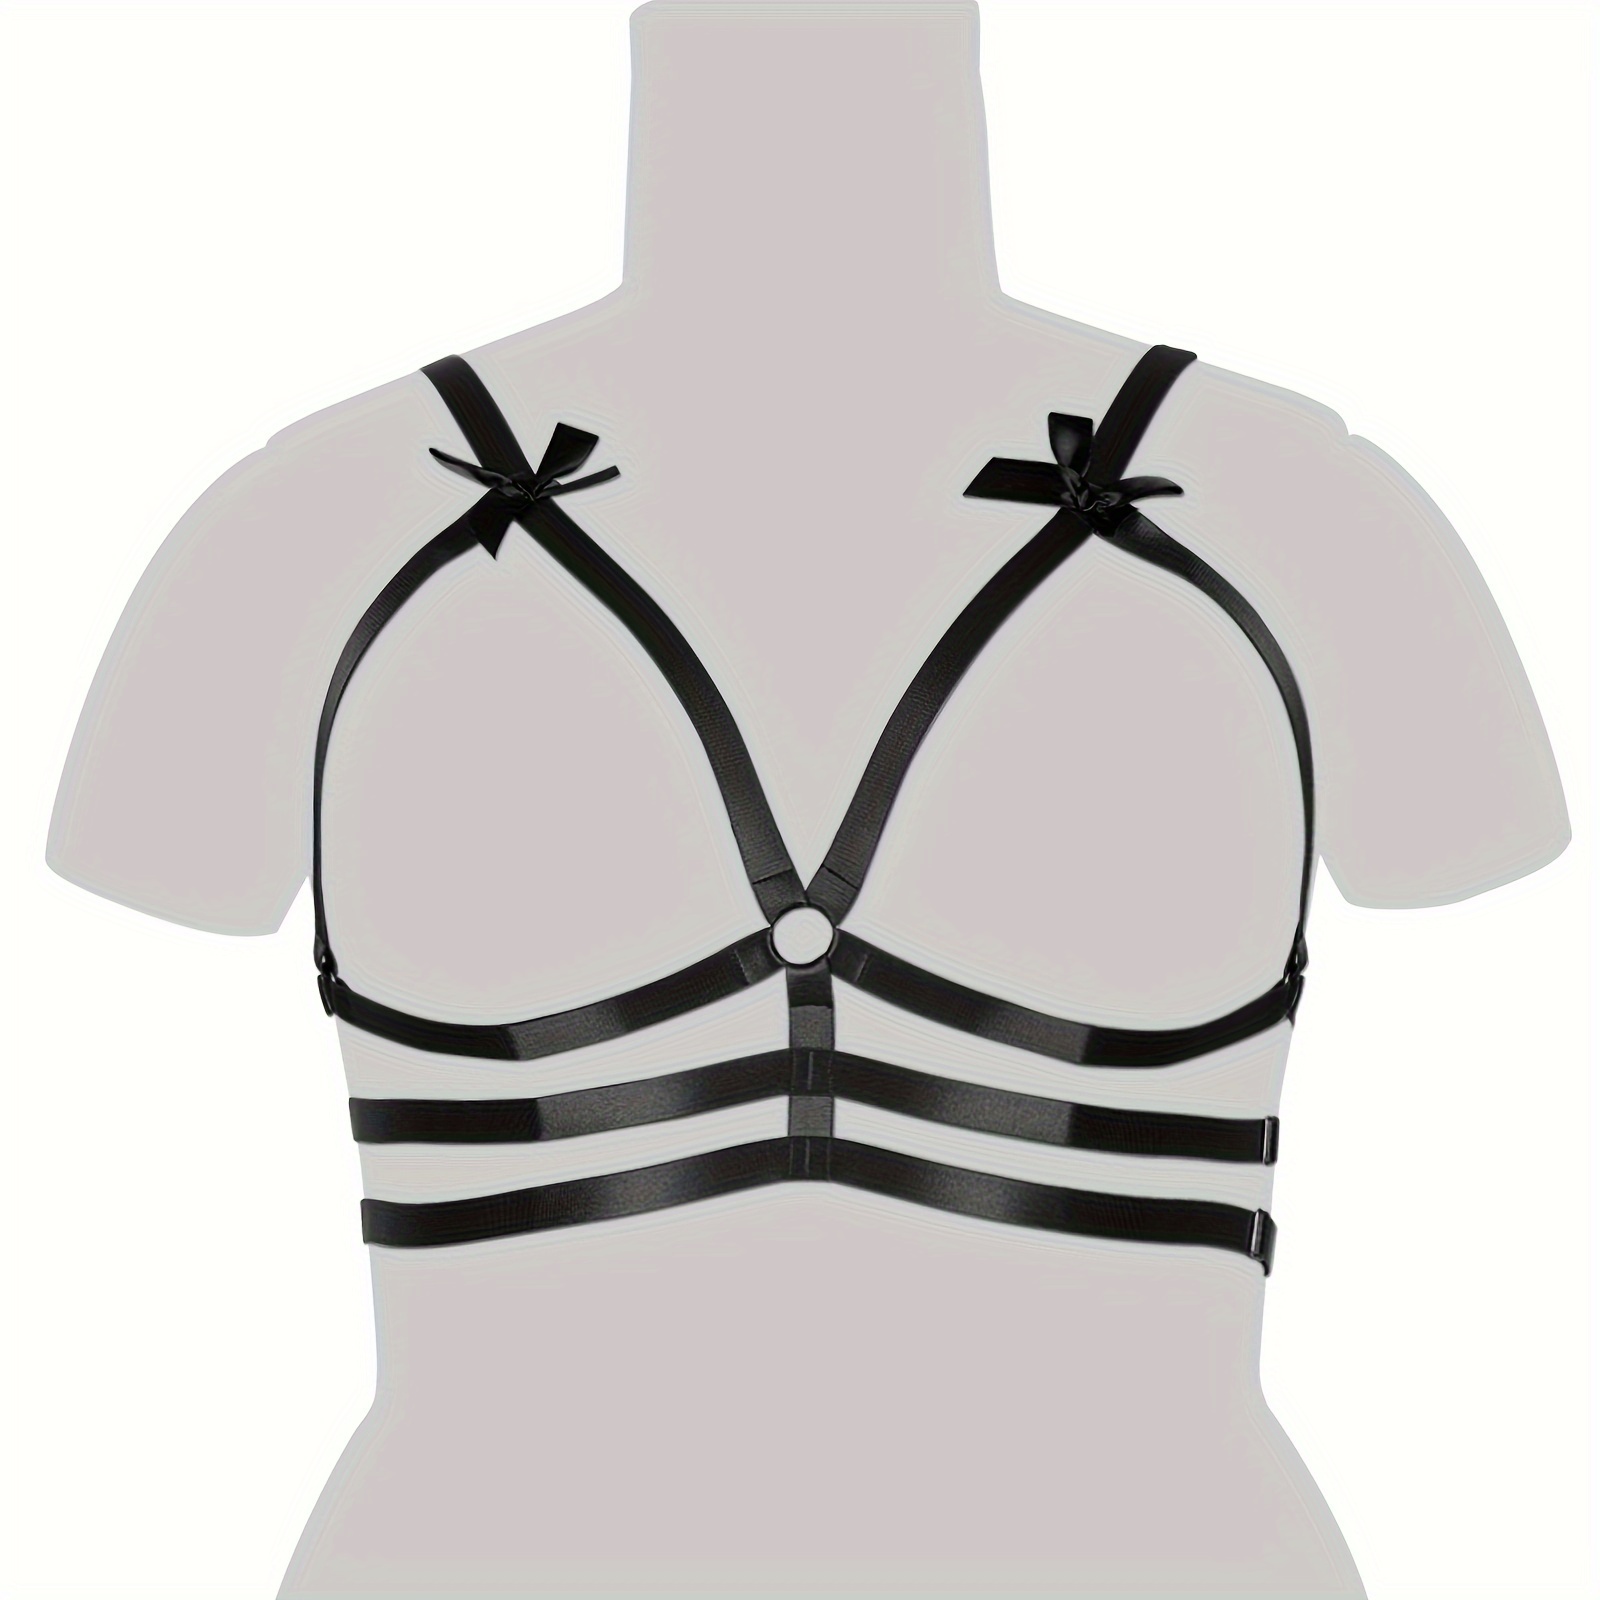 Plus O-ring & Layered Chain Detail Harness Bra